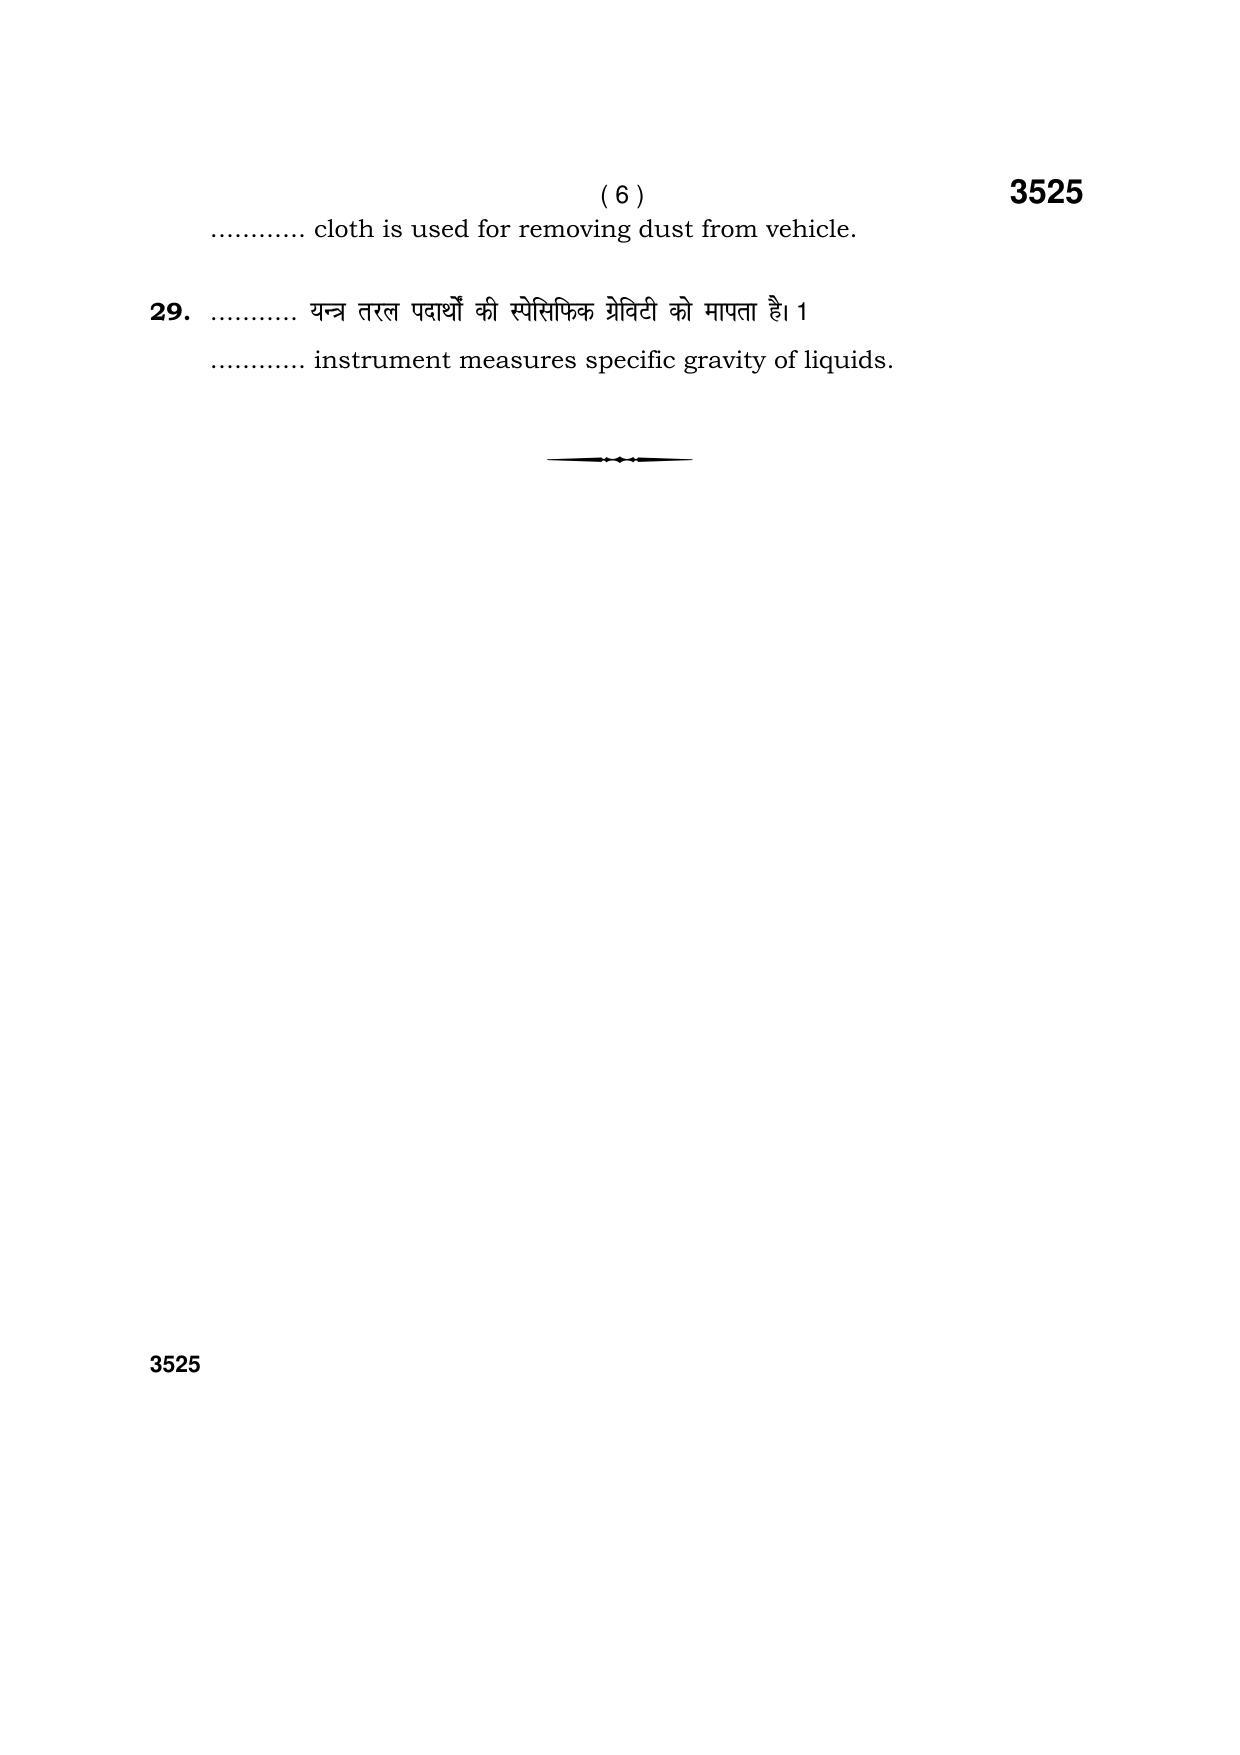 Haryana Board HBSE Class 10 Automobile 2018 Question Paper - Page 6